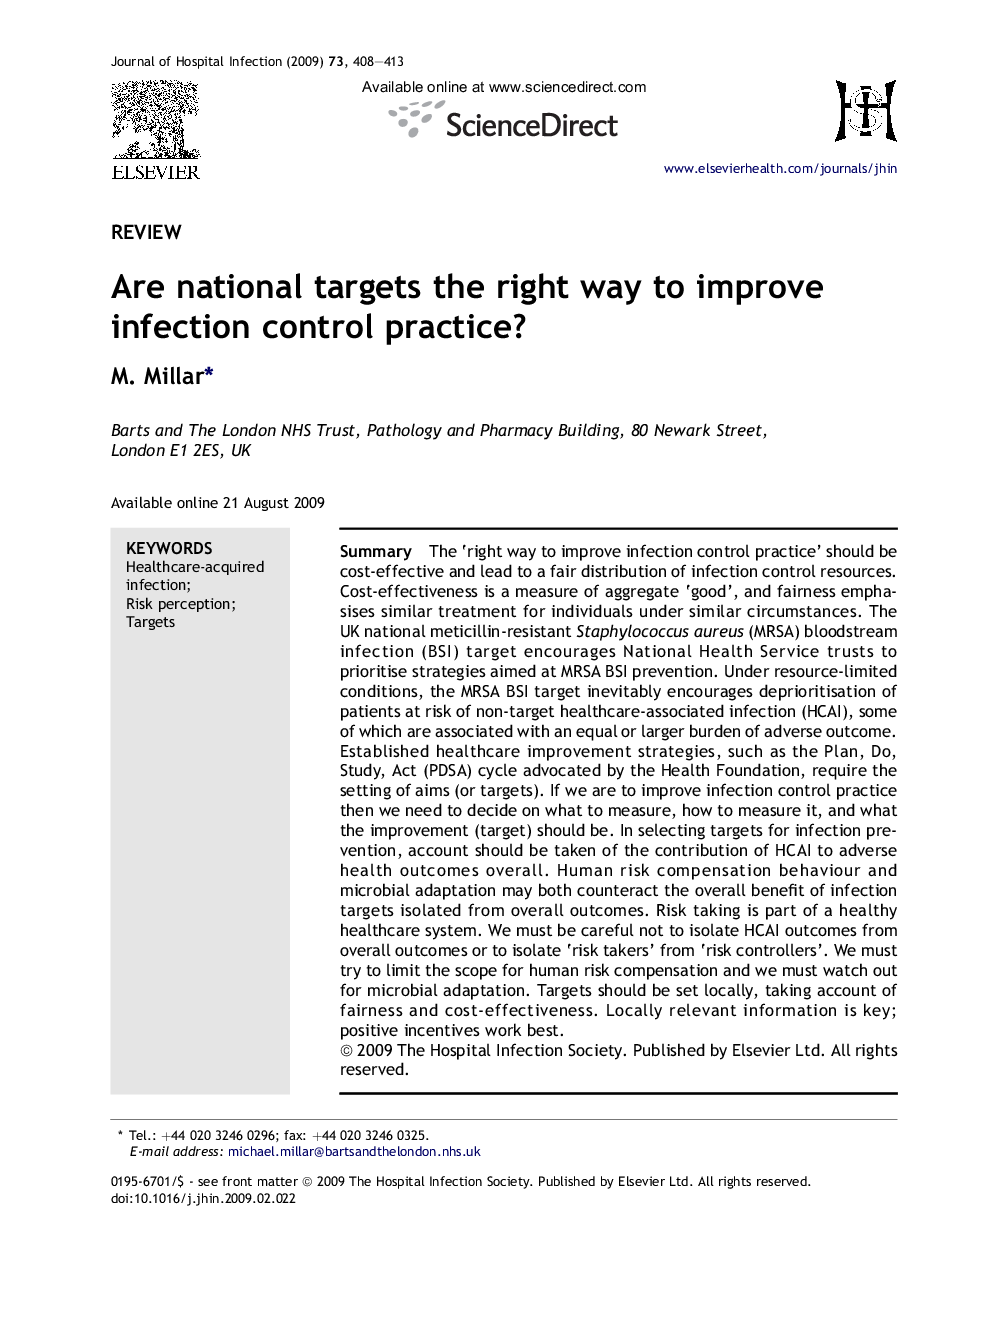 Are national targets the right way to improve infection control practice?